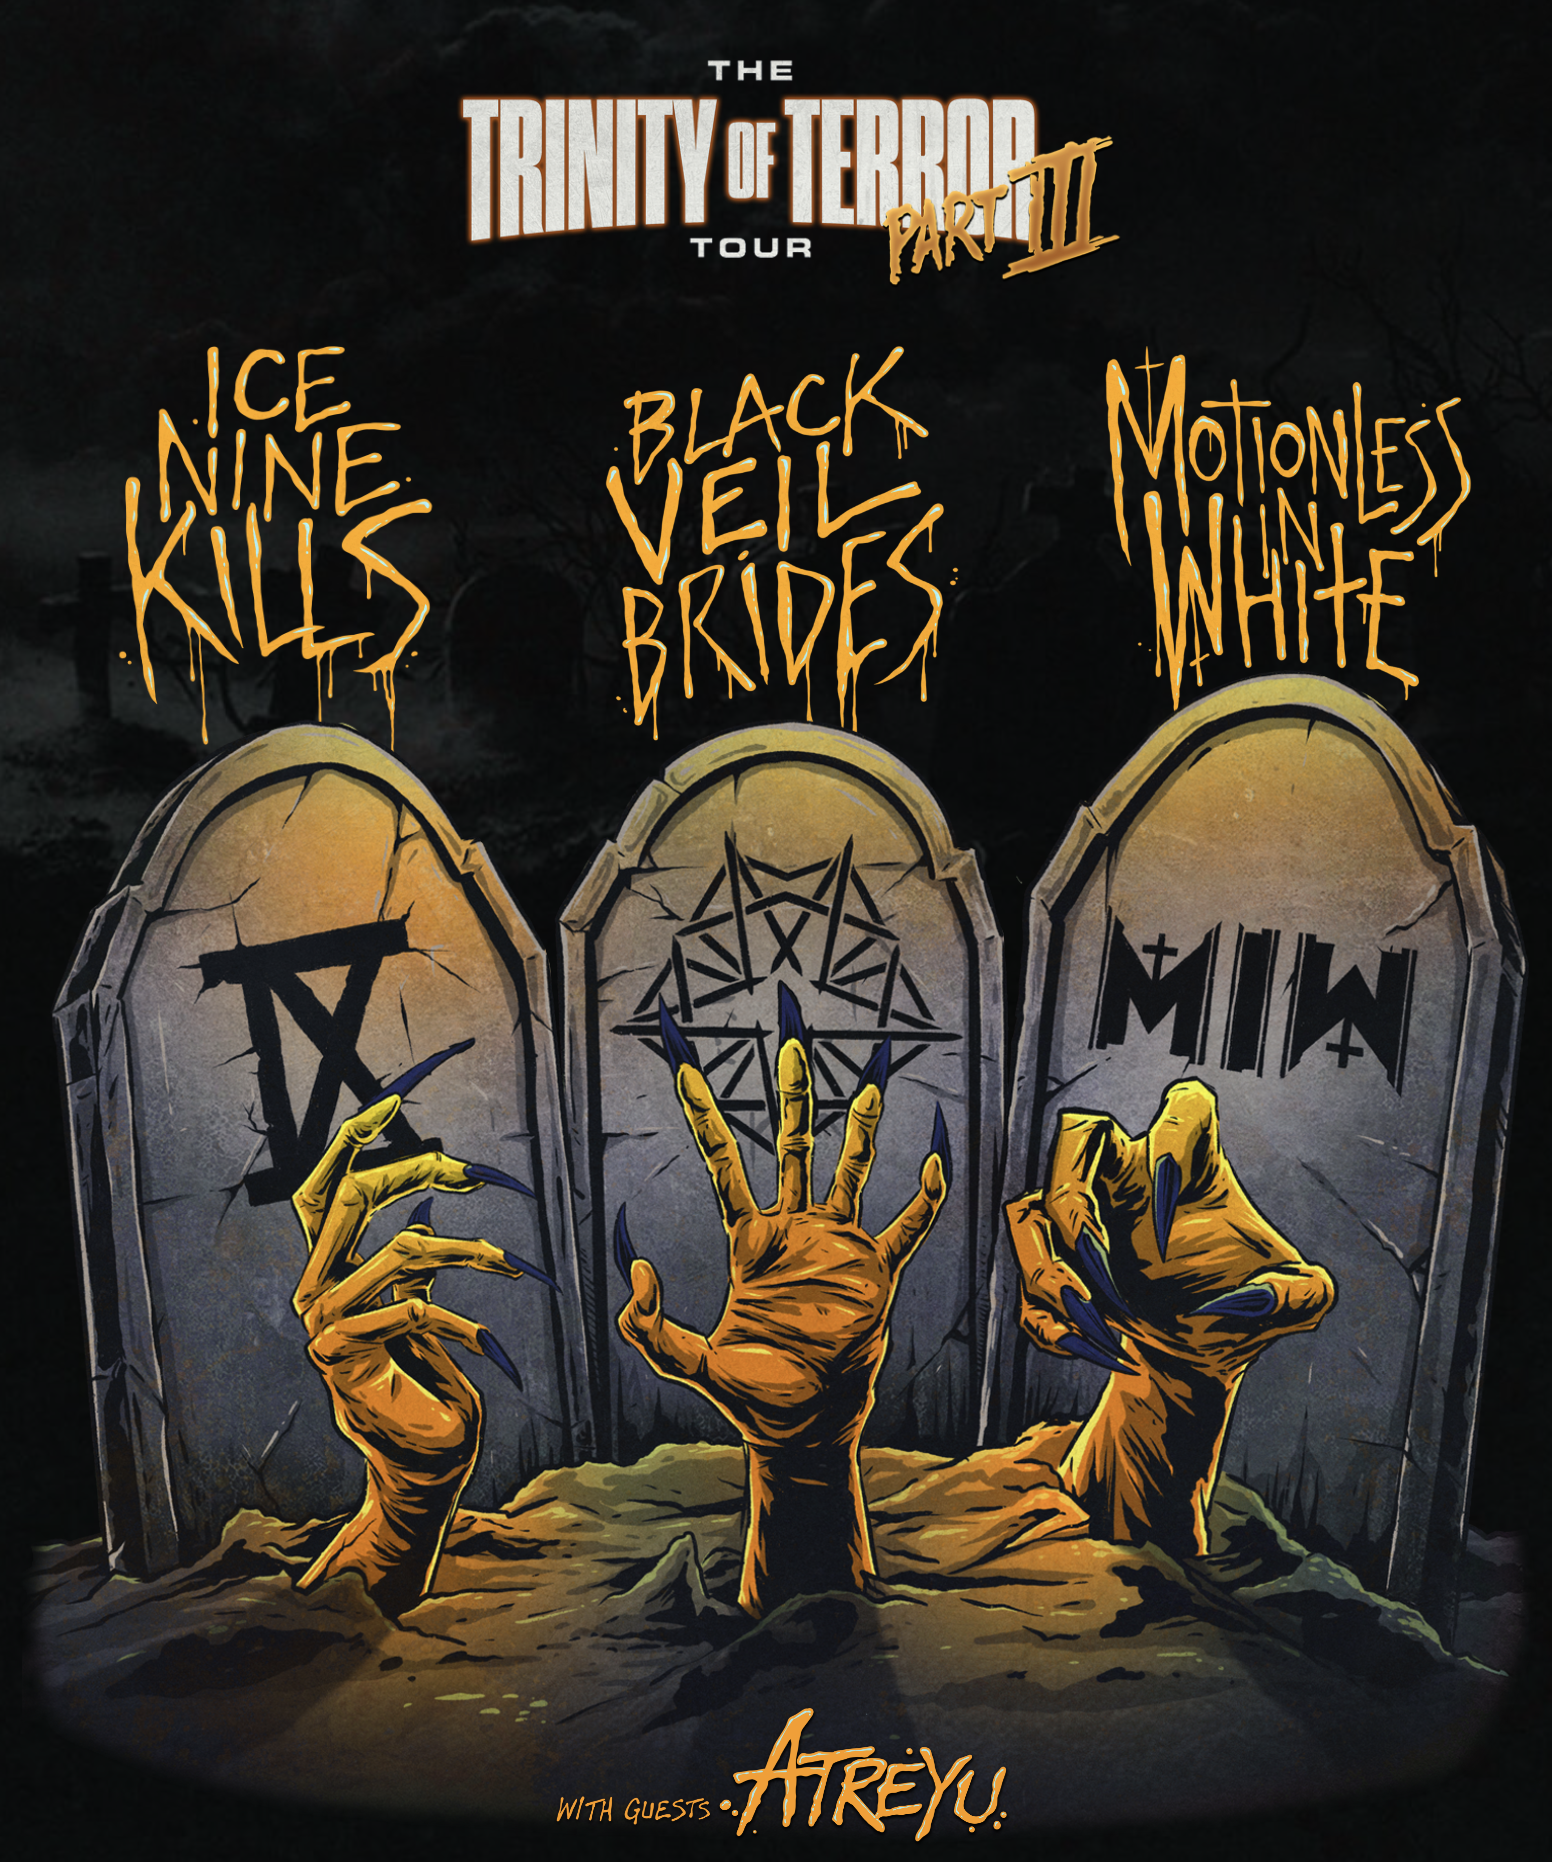 The Trinity of Terror Tour Part III packs the Main Street Armory in Rochester, NY